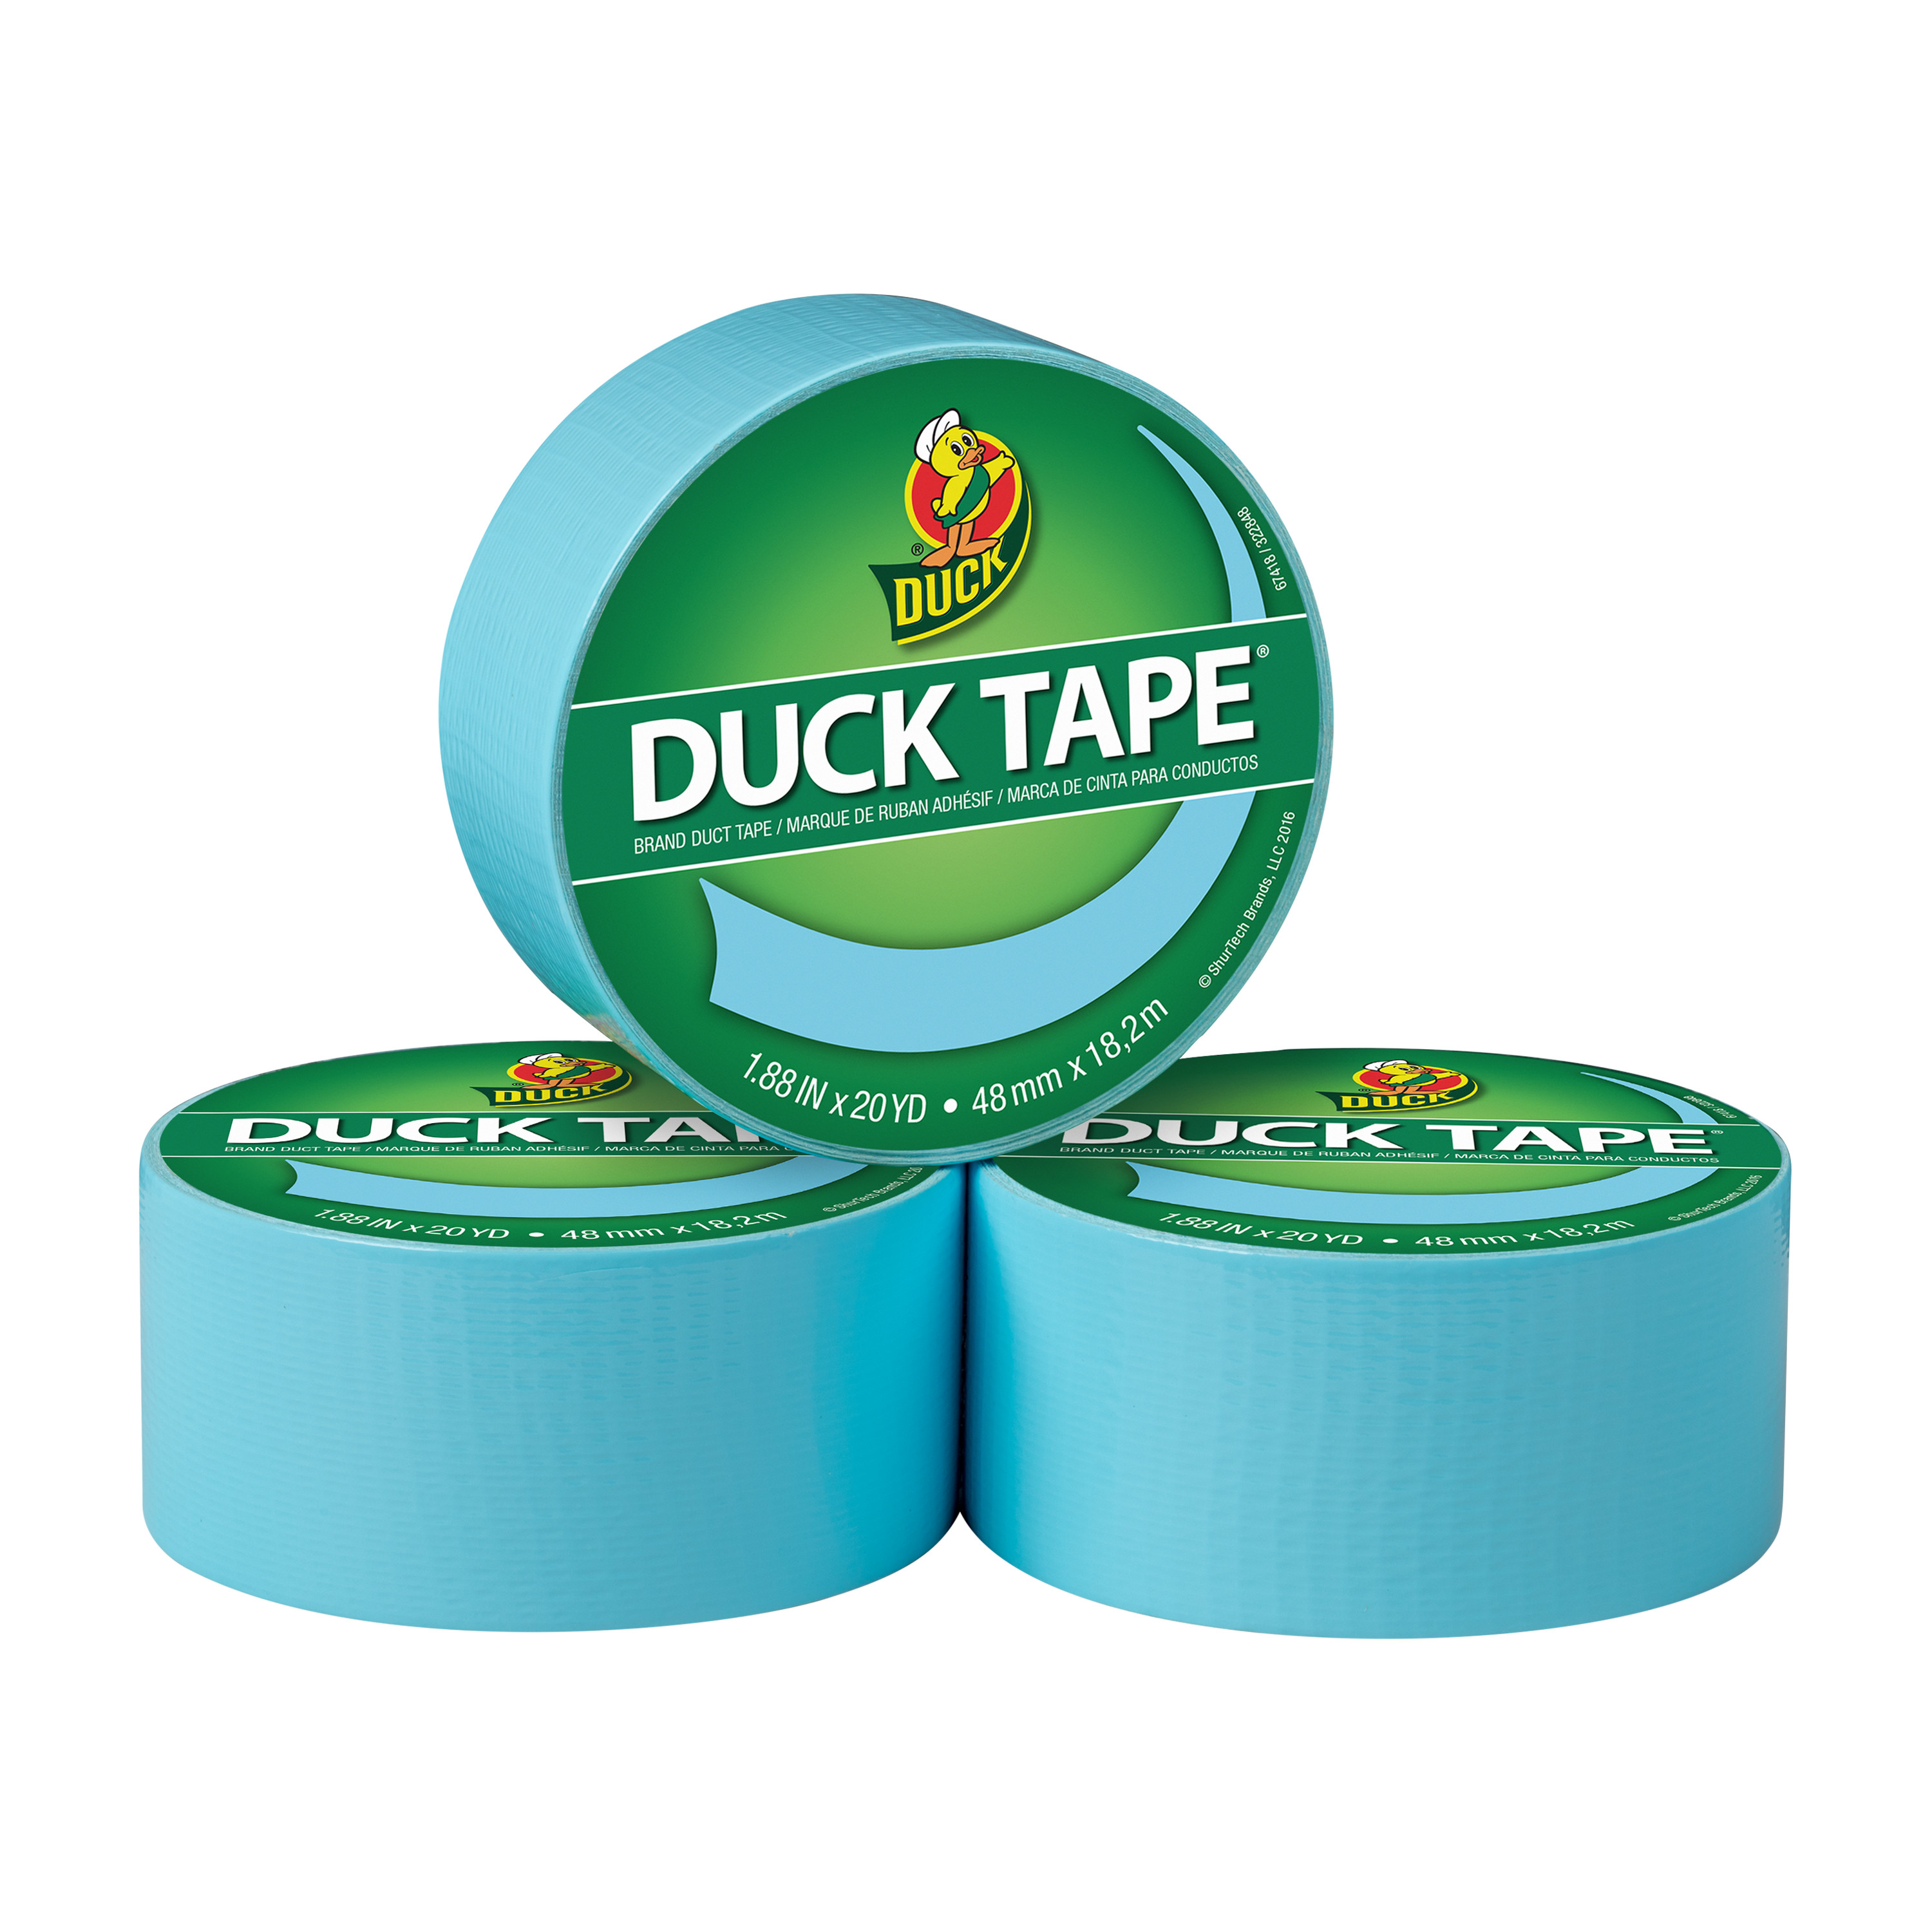 Duck Brand 1.88 in. x 20 yd. Frozen Blue Colored Duct Tape, 3 Pack - image 1 of 7